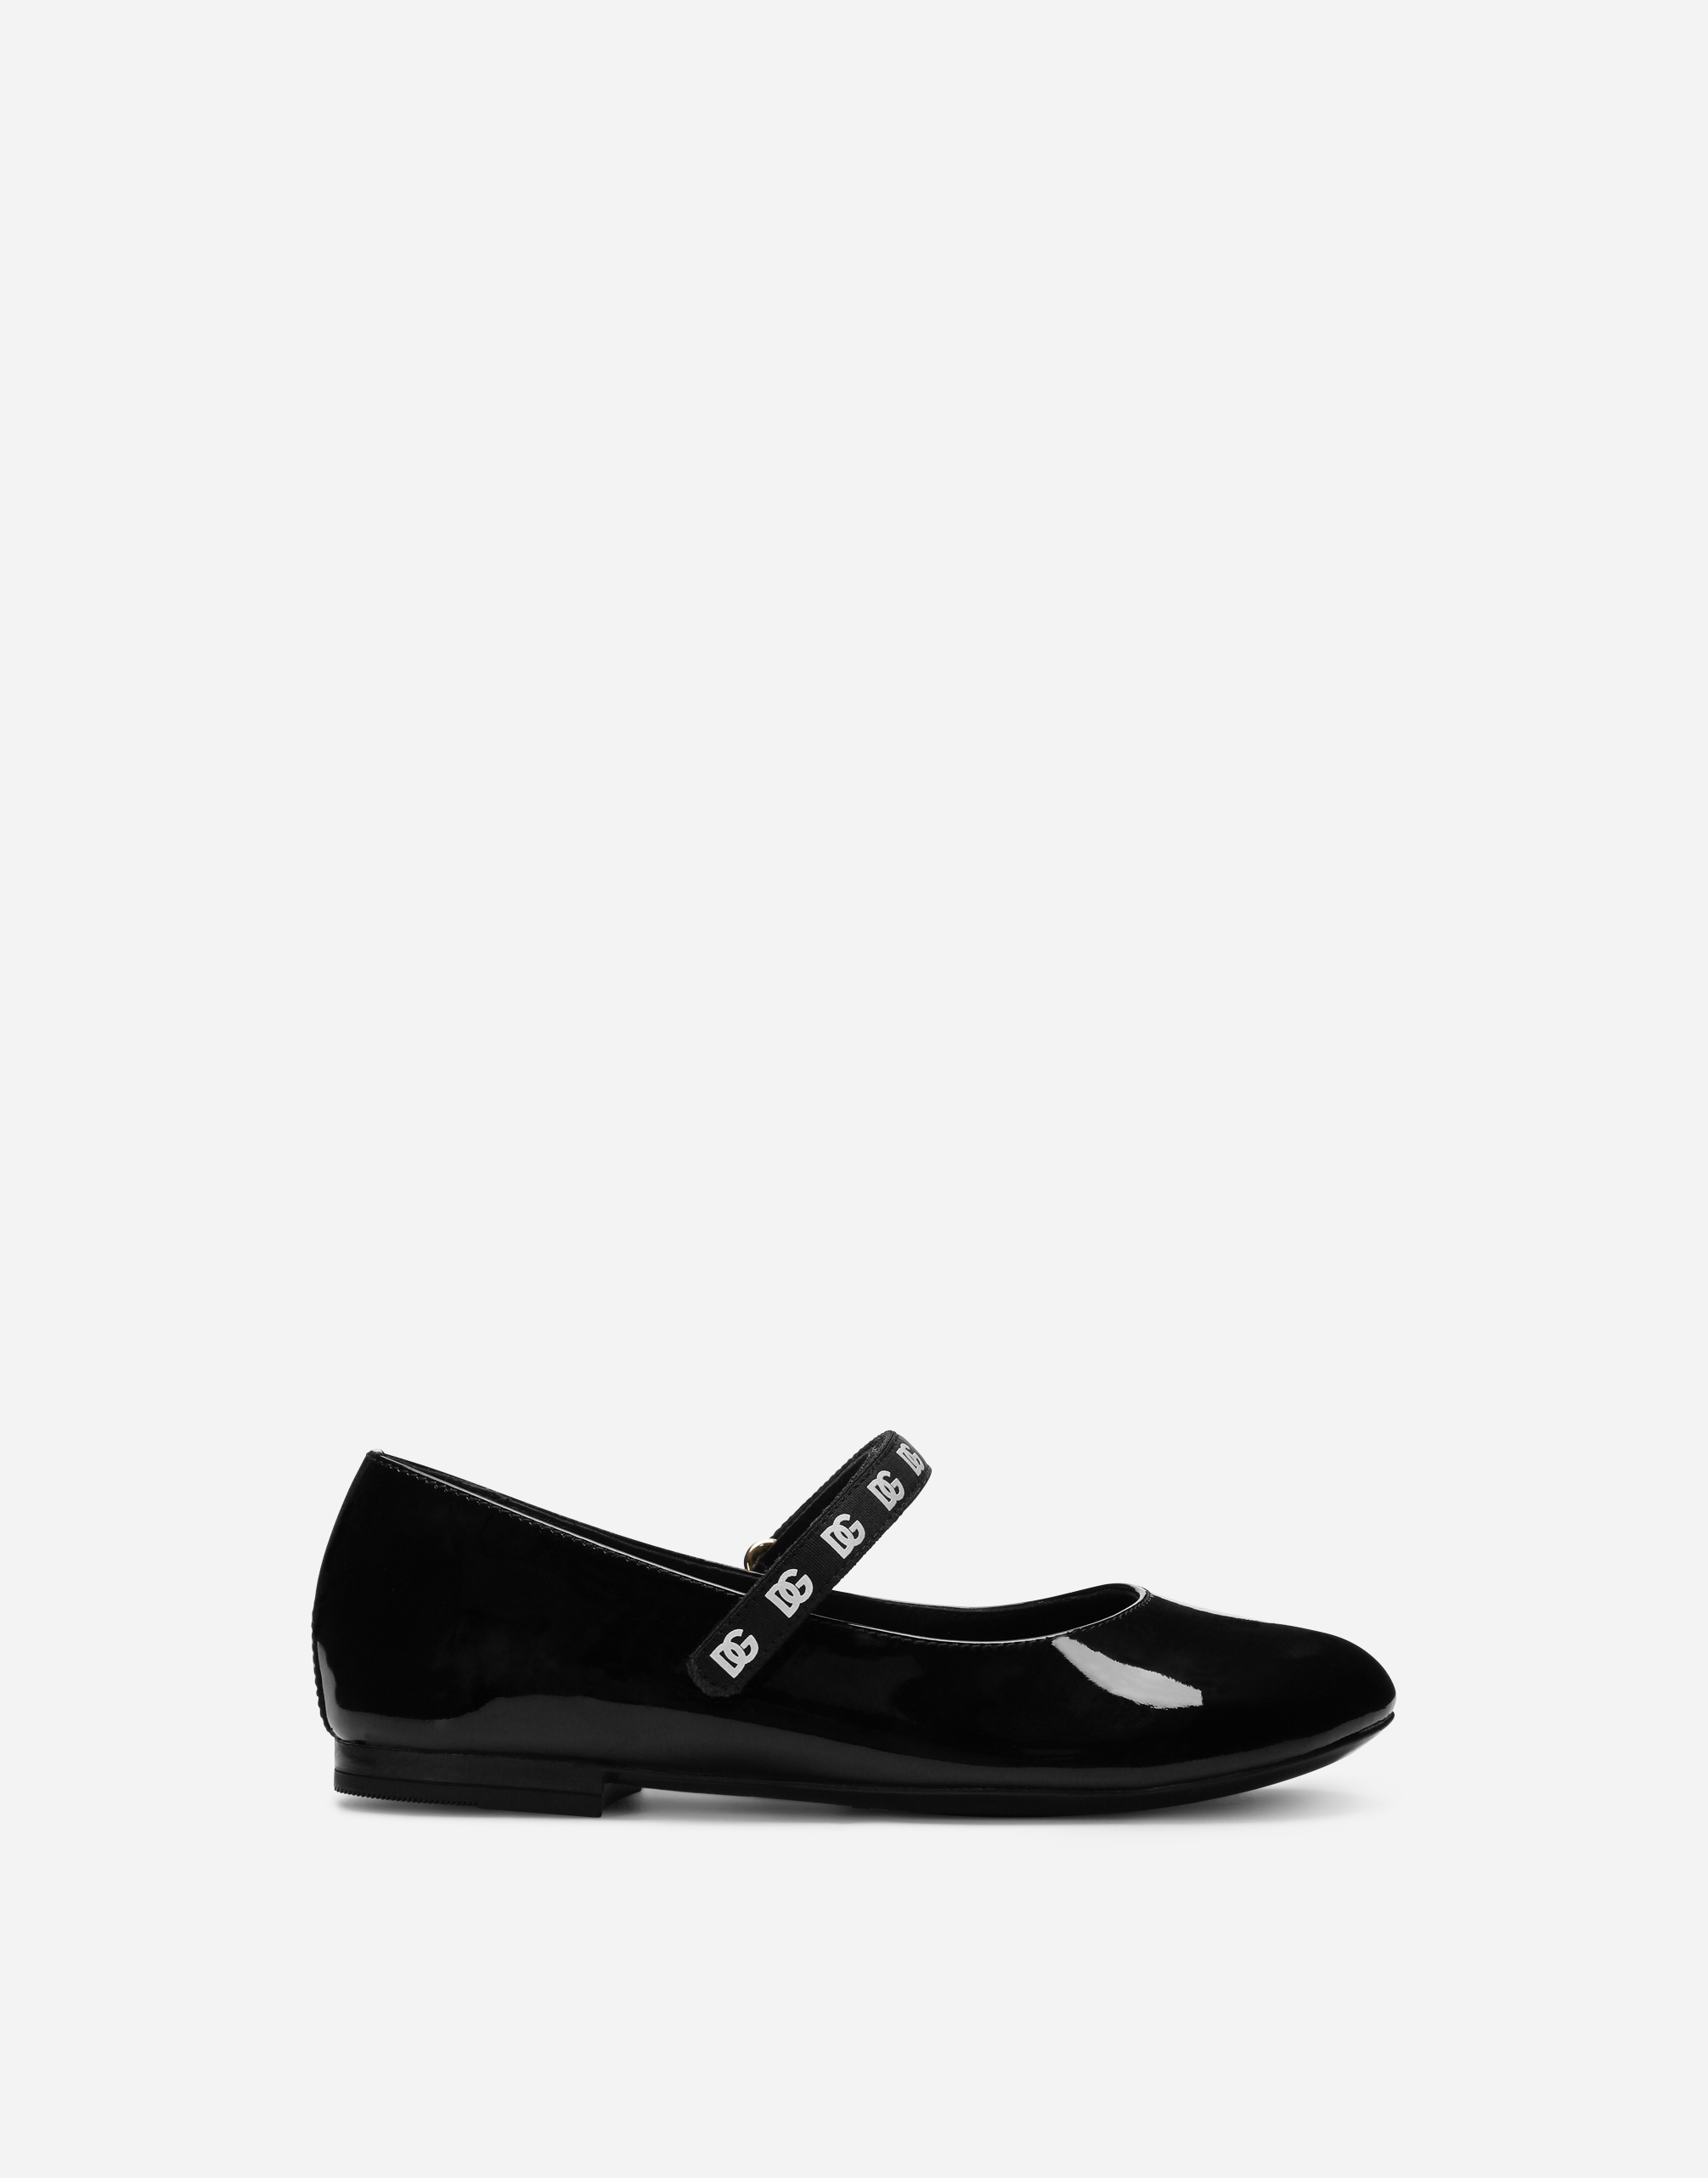 Dolce & Gabbana Kids' Patent Leather Ballet Flats With Dg-logo Strap In Black